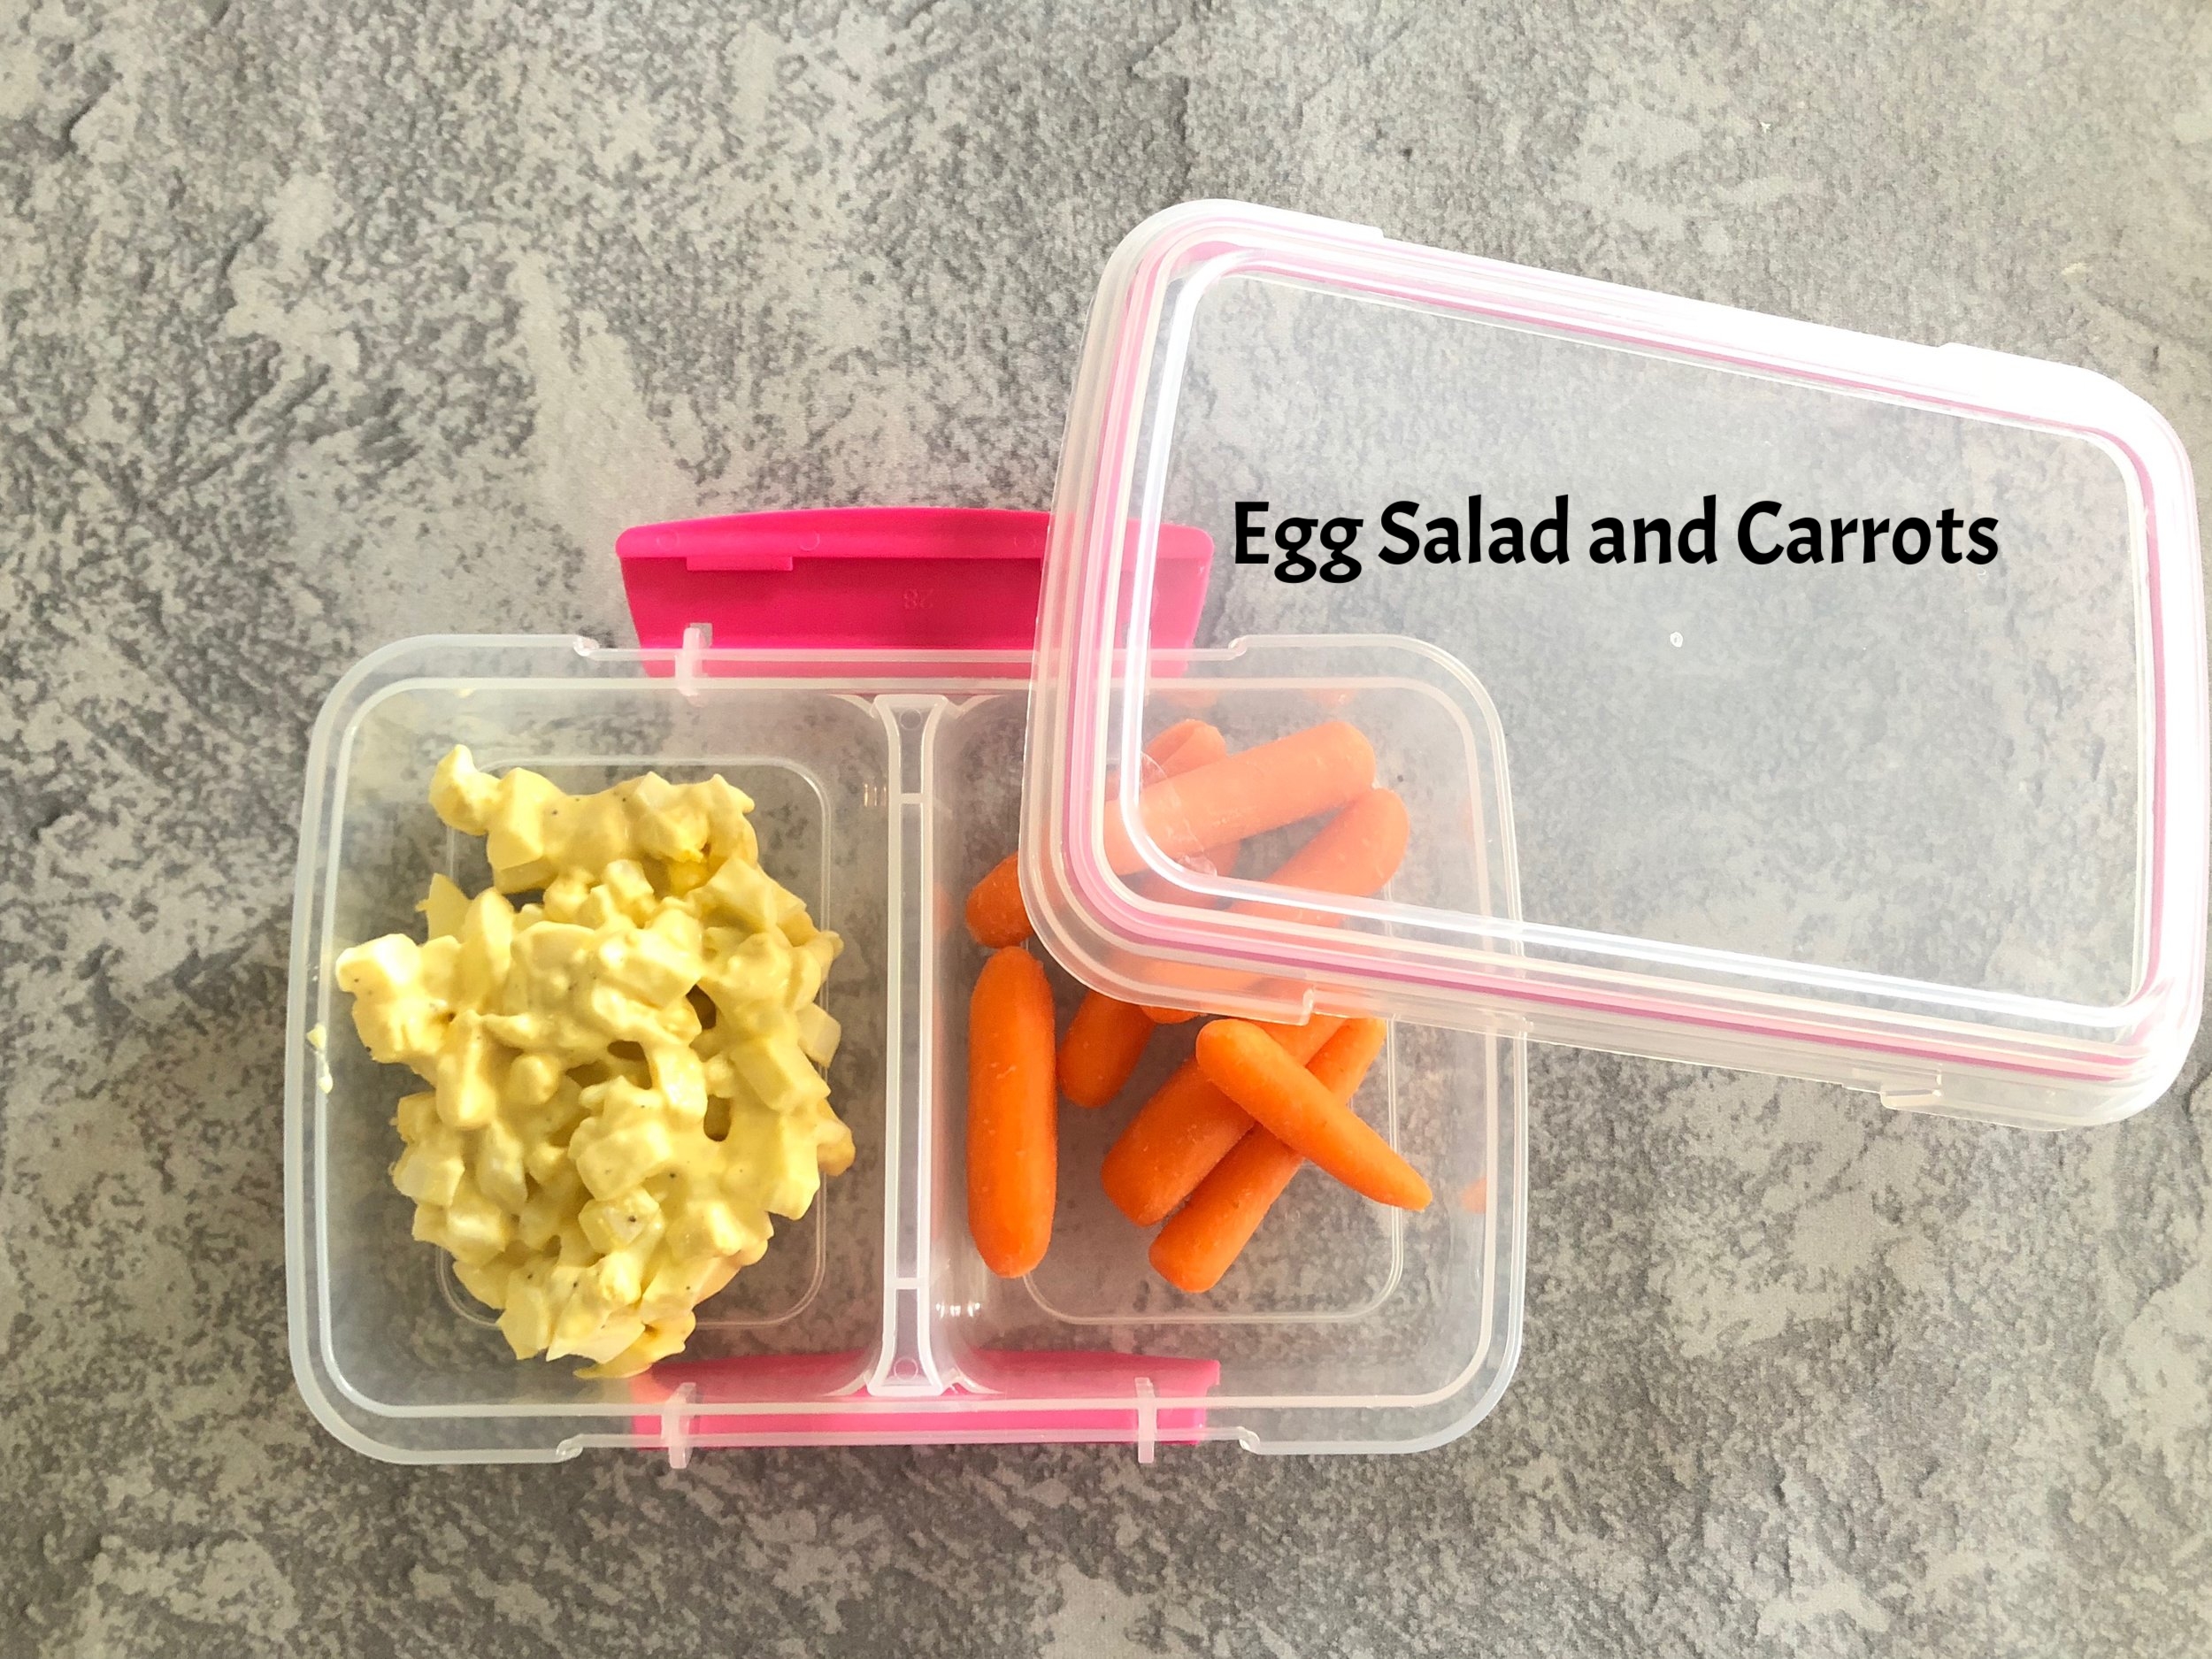 Lunch Egg Salad and Carrots Keto and Low Carb.jpg